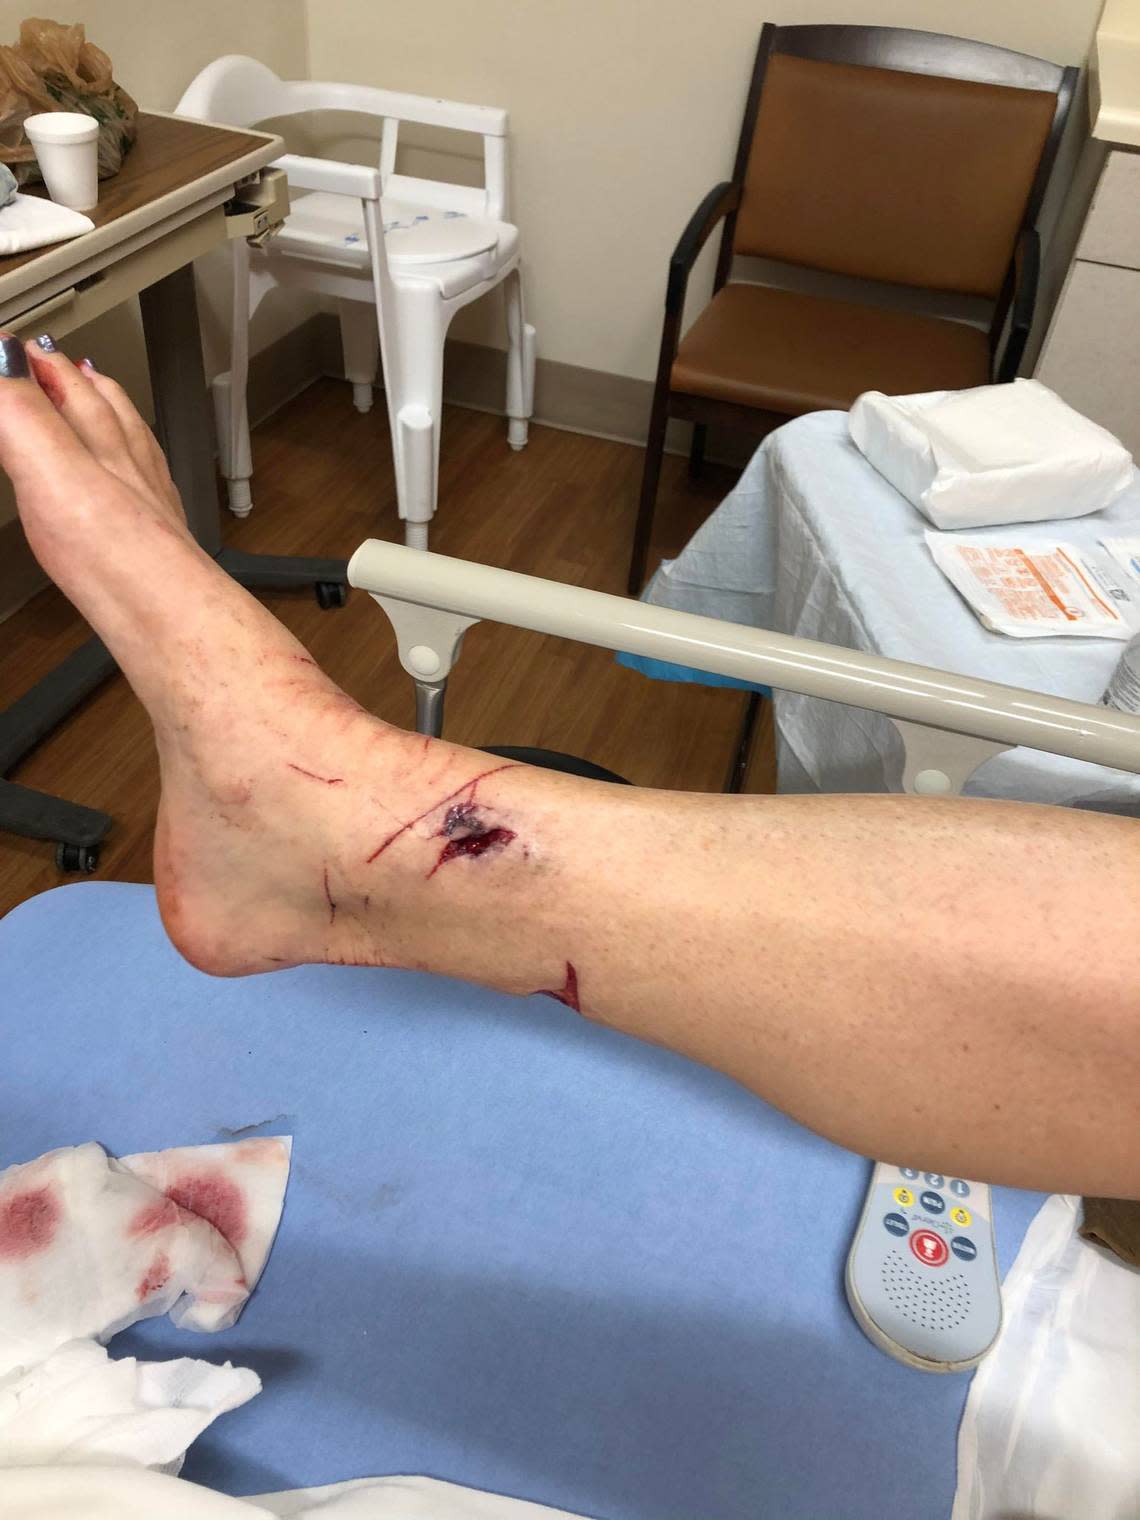 Barabara Ard, vacationing on Hilton Head Island from N.C., was bitten twice by a raccoon during Labor Day weekend and received more than 20 stitches after the attack.